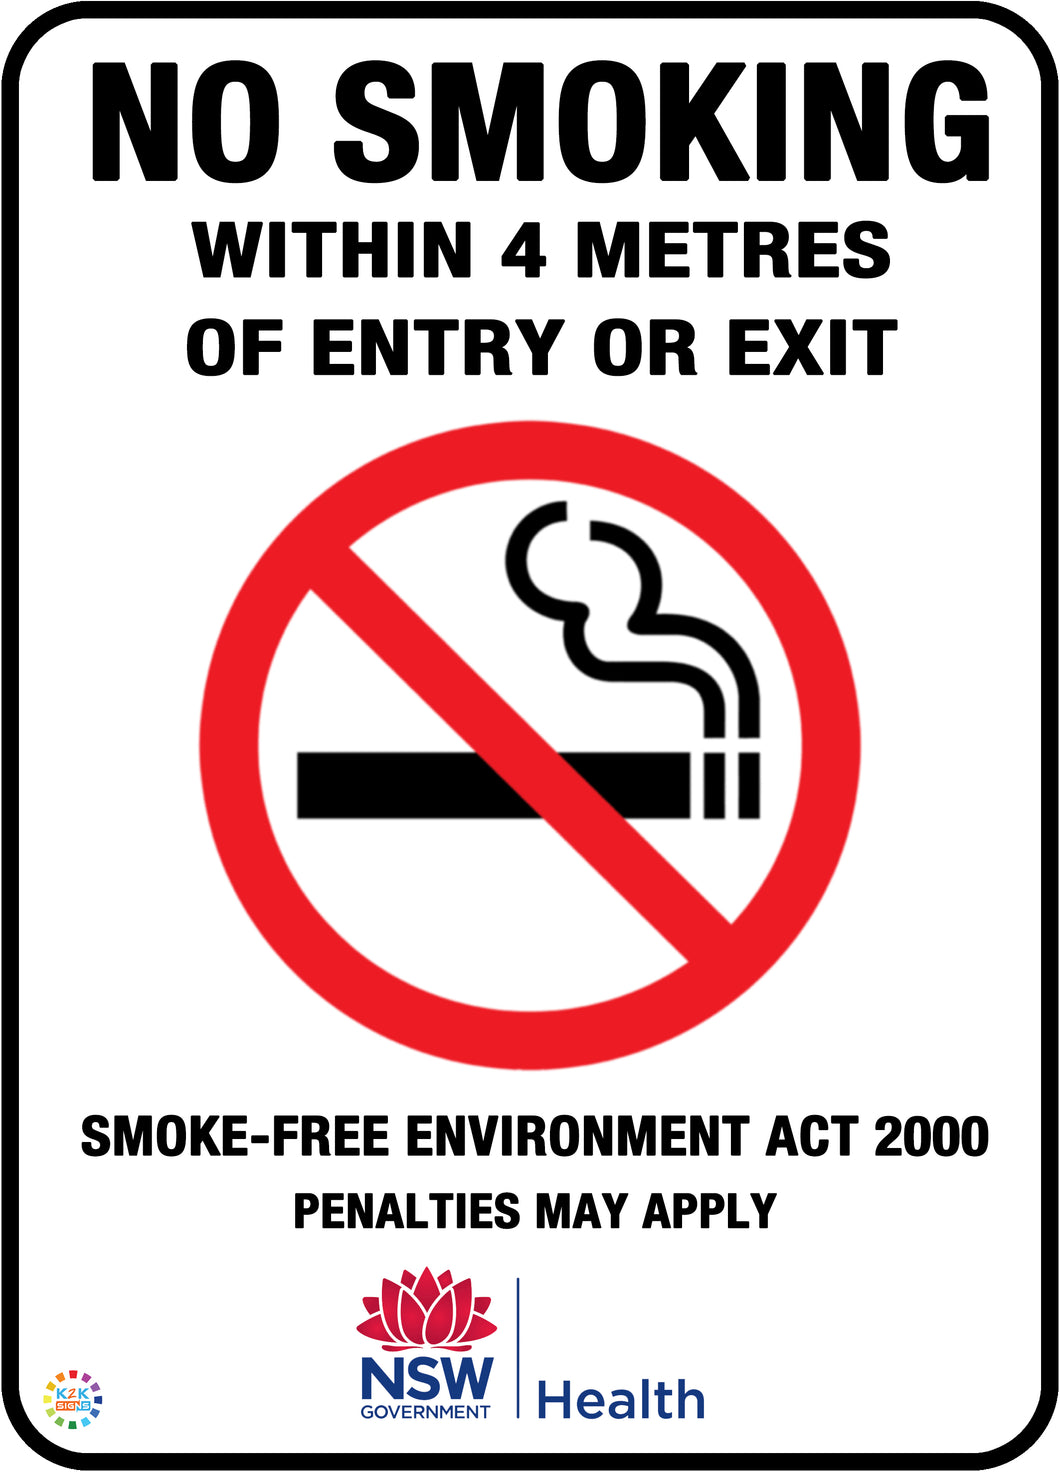 No Smoking Within 4 Metres of Entry or Exit Sign